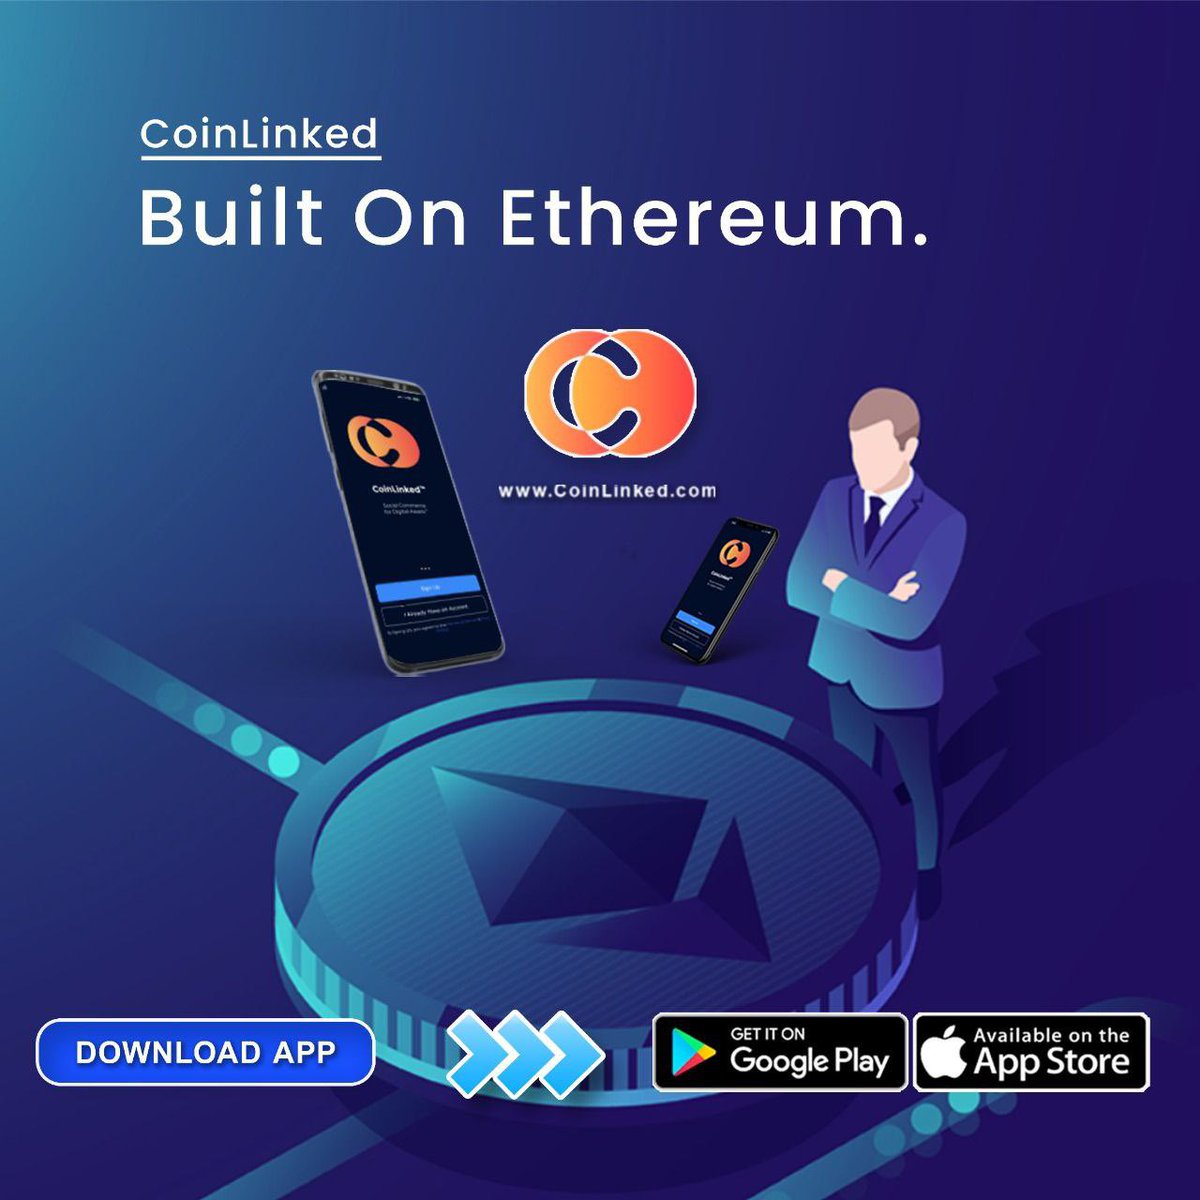 9/ Bugs and enhancements will be done within the next 1-2 weeks!Next week, I will do a thread outlining  #CoinLinked’s TWO NATIVE TOKENS — a  #SECURITY TOKEN and our ERC-20  #UTILITY TOKEN.Yes,  @coinlinked is  #BuiltOn  #Ethereum! Ethereum, few understand this.  /end